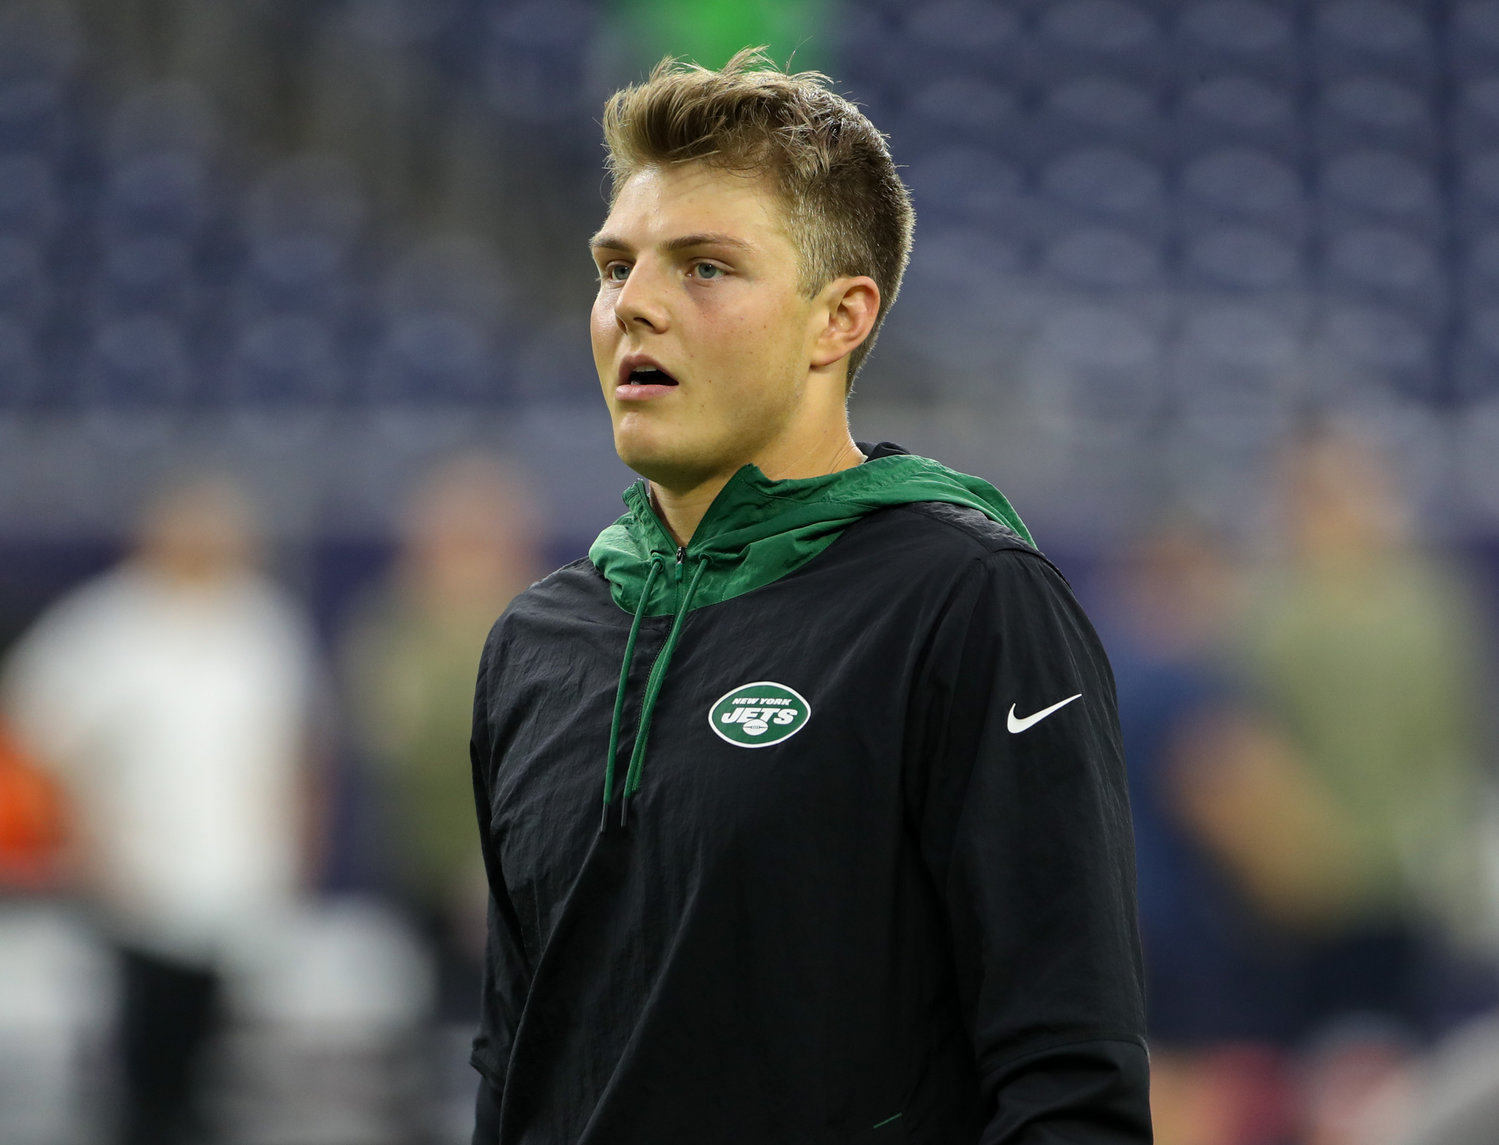 New York Jets quarterback Zach Wilson (2) during pregame warmups before an NFL game between the Houston Texans and the New York Jets on November 28, 2021 in Houston, Texas.